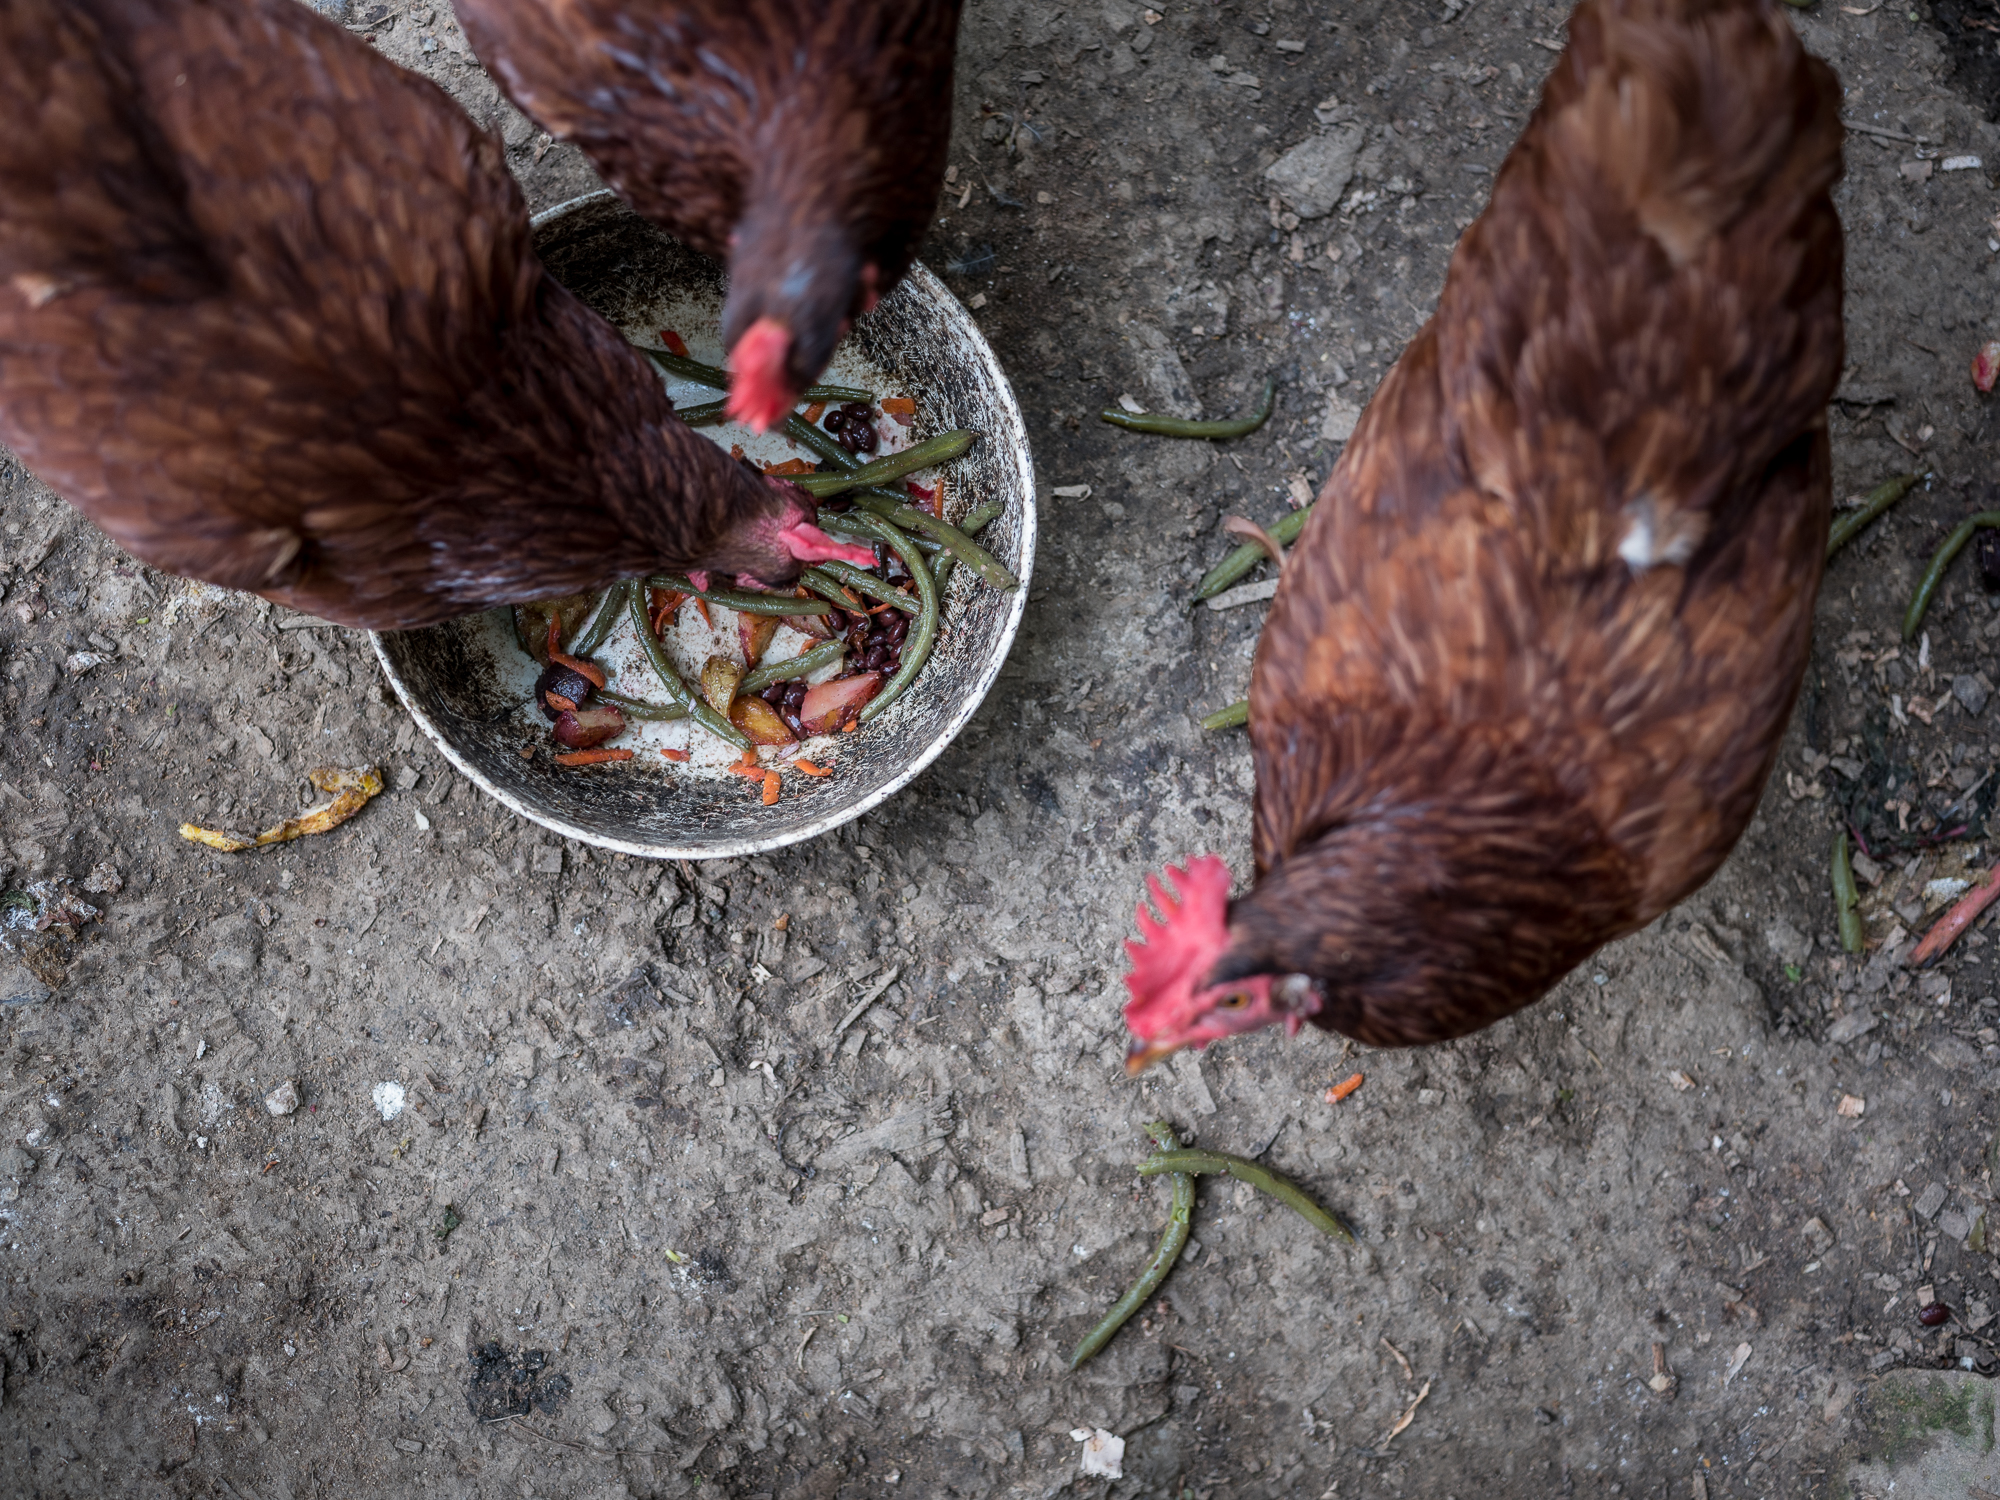 Chickens and Table Scraps, Bloomington, Indiana, 2018